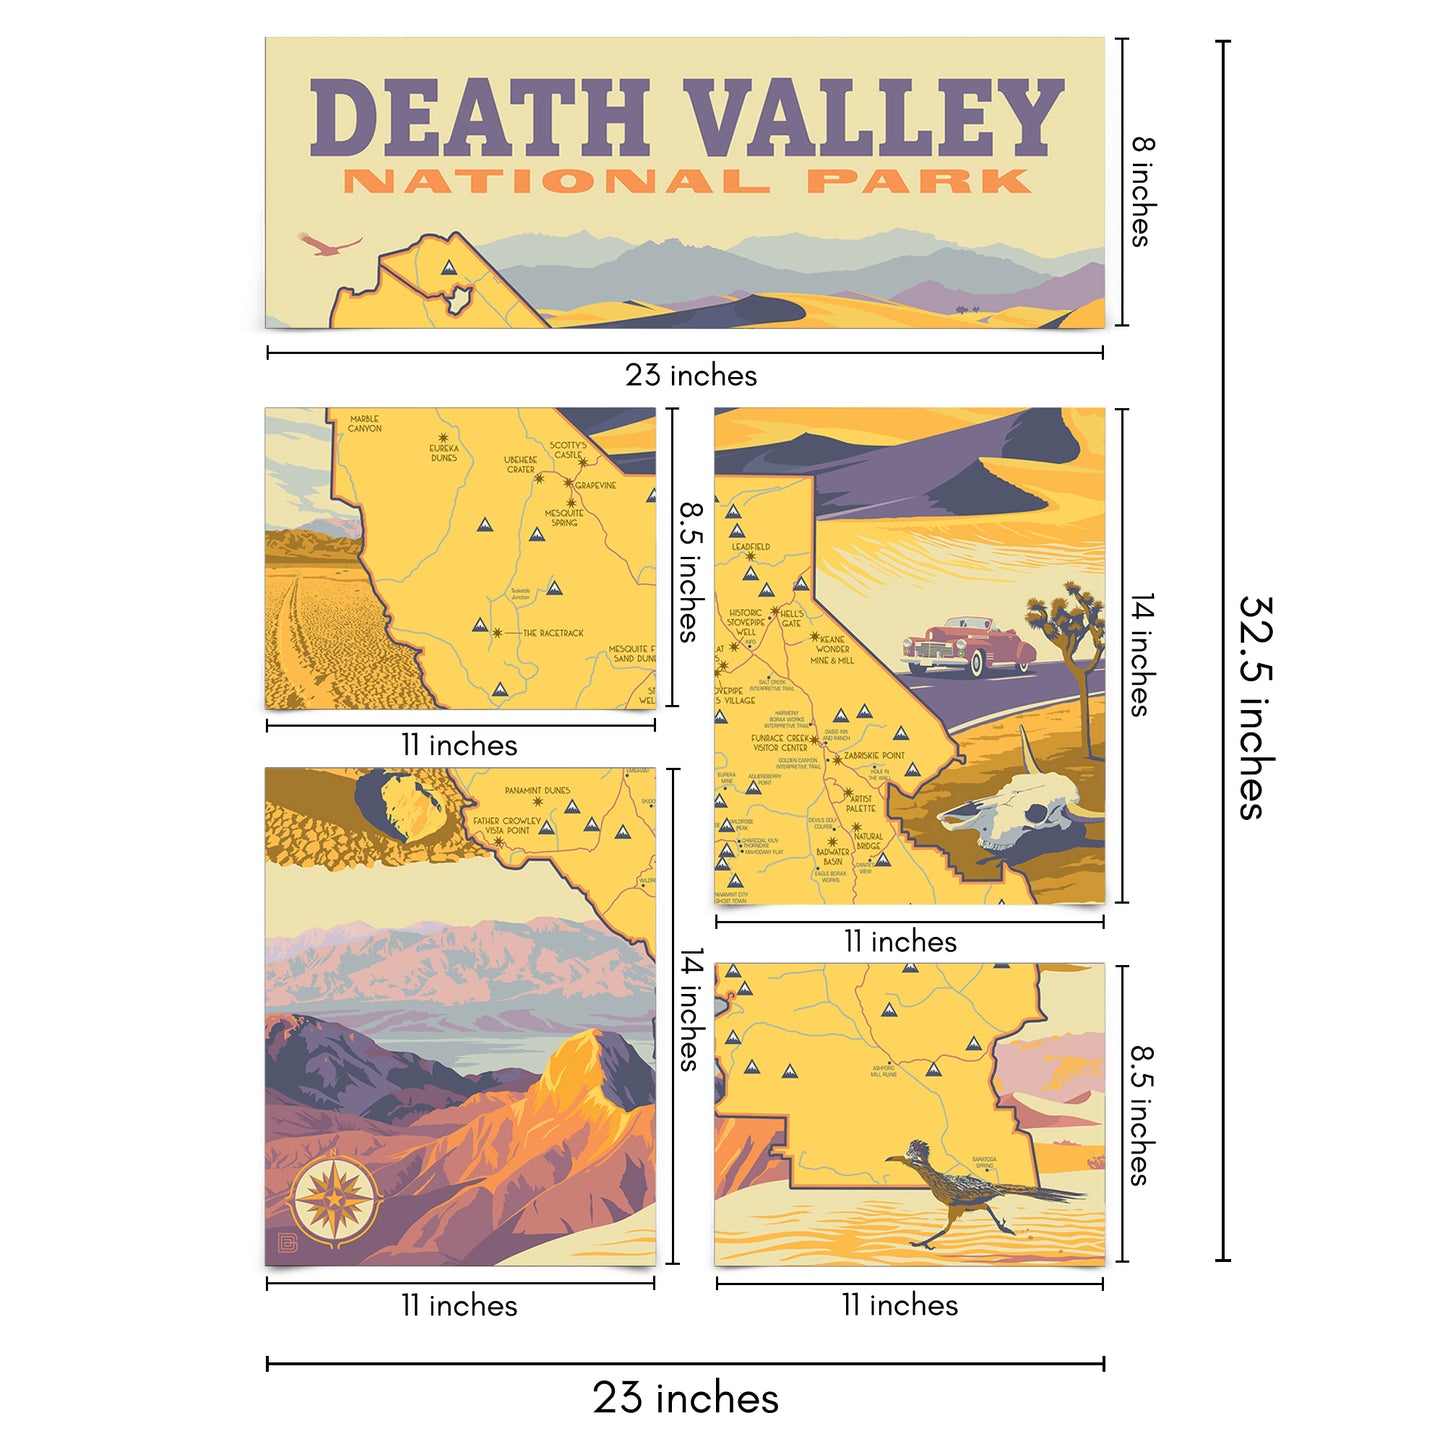 Death Valley National Park Illustrated Map 5 Piece Grid Wall Art Room Decor Set  - Print